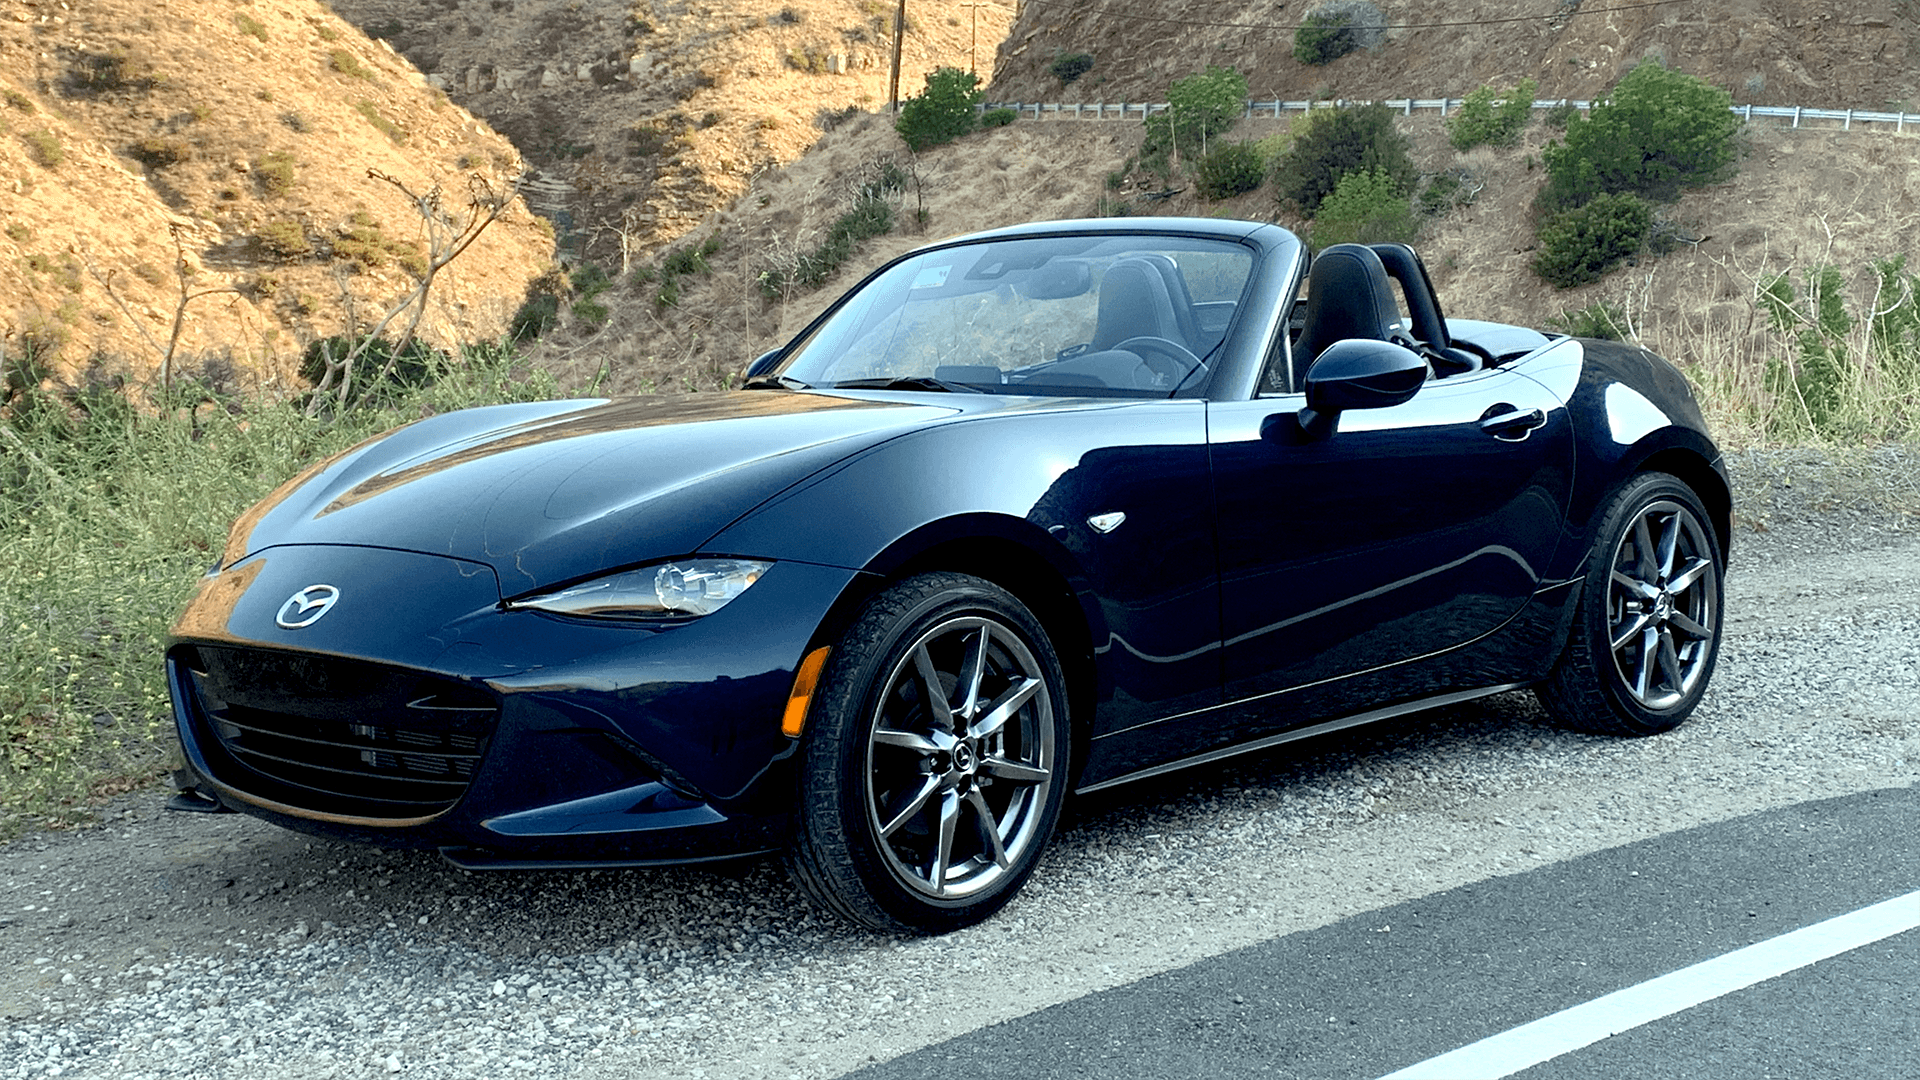 2021 Mazda MX-5 Miata Review: Still a Pure Driver's Car After 32 Years